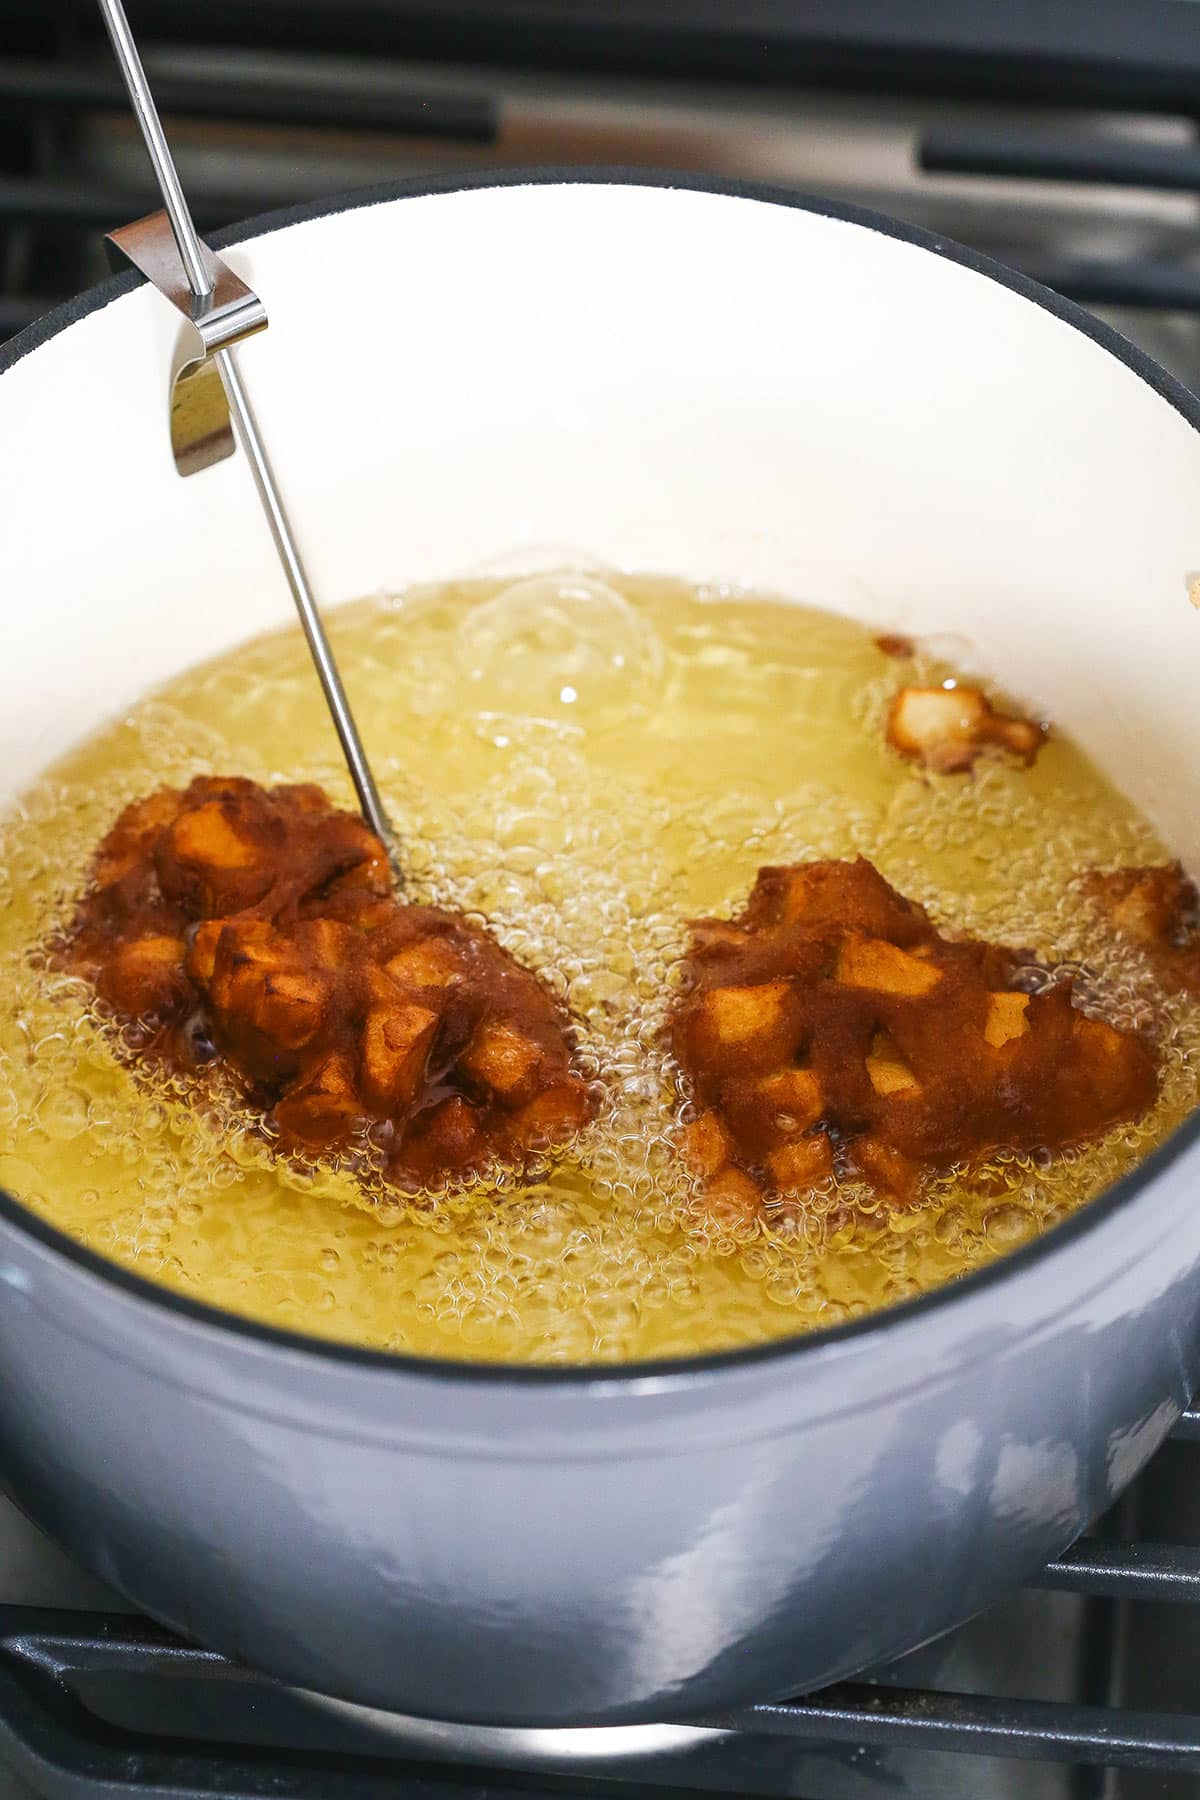 Two apple fritters frying in a pot of oil with a candy thermometer stuck inside